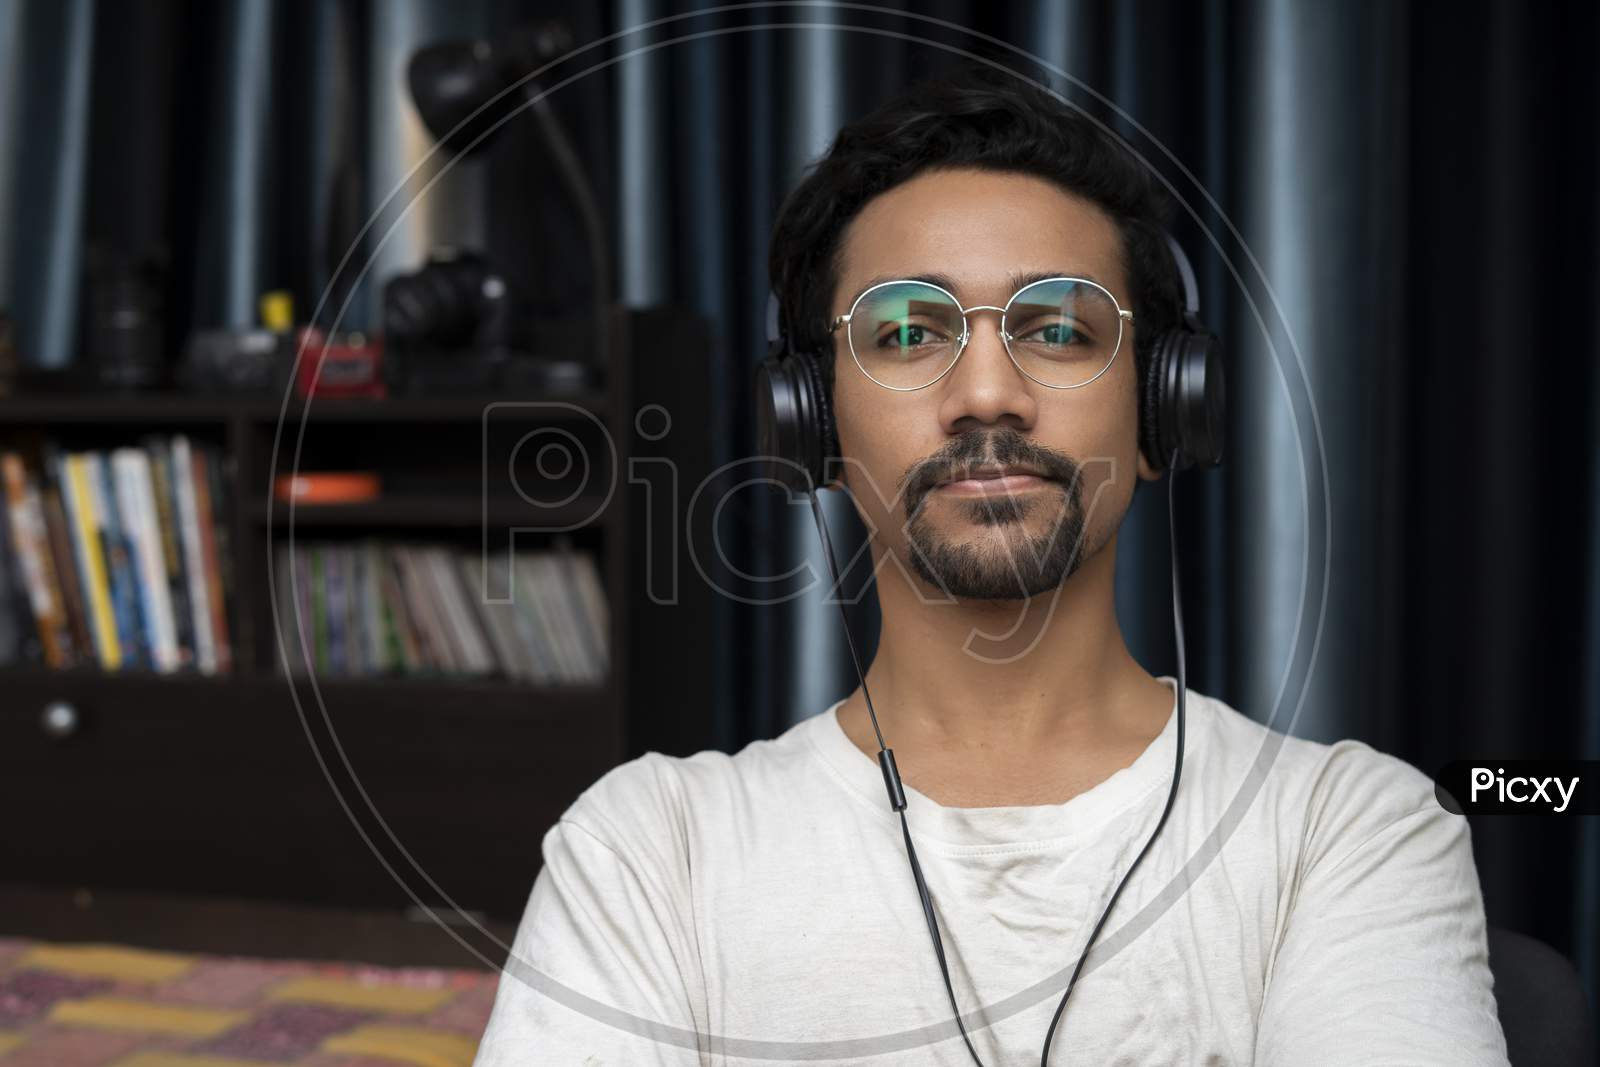 Young Indian Boy Wearing Glasses And Headphones Looking Into The Camera And Smiling